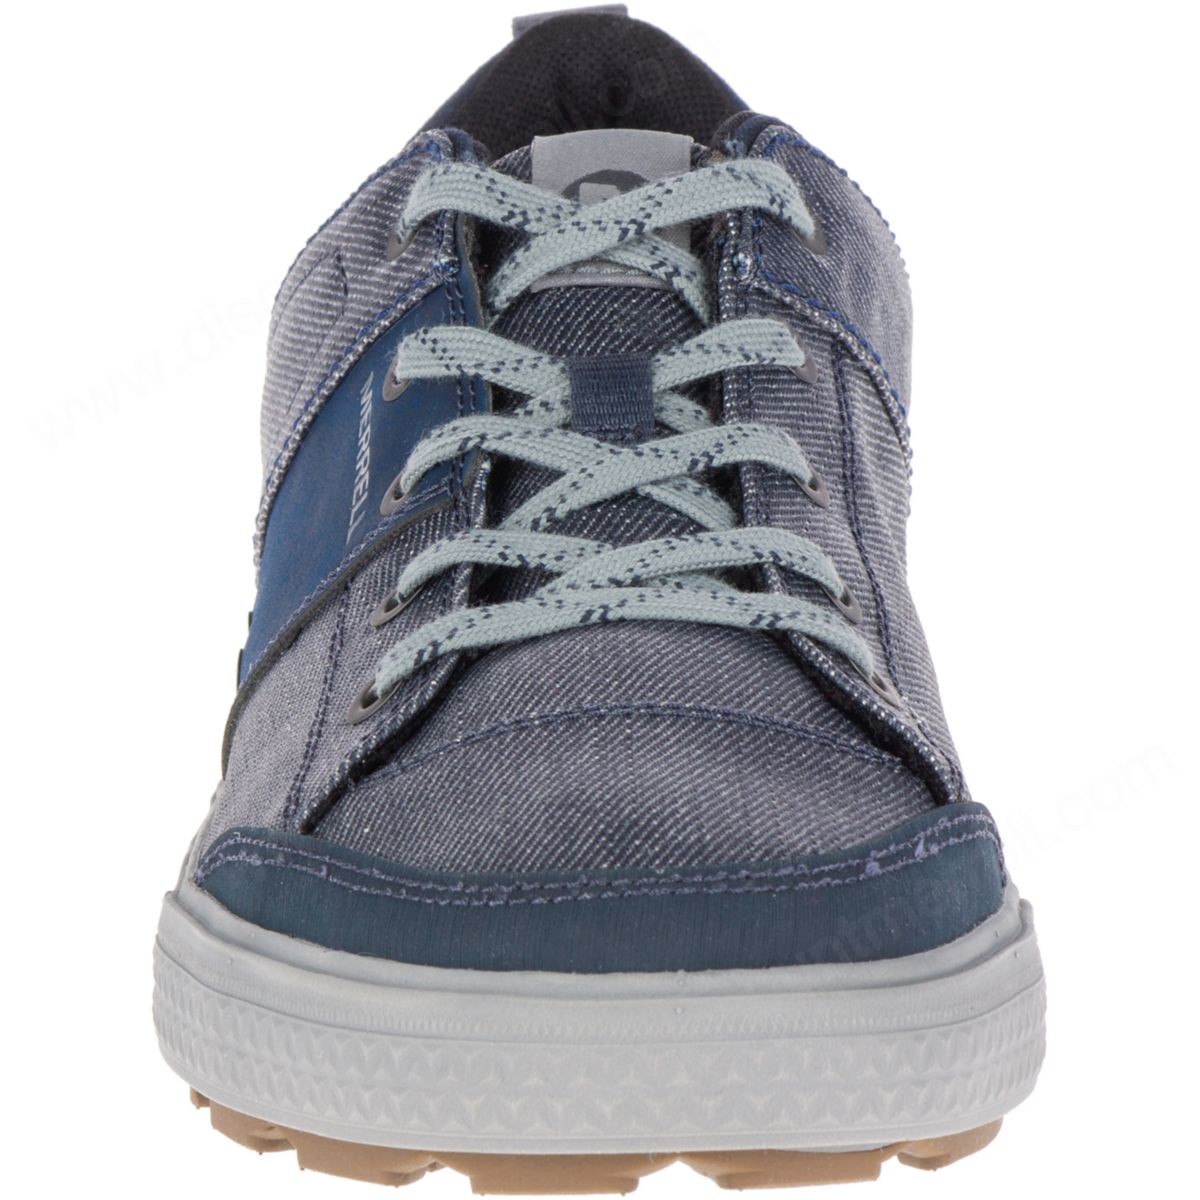 Merrell Mens's Rant Discovery Lace Canvas Denim - -4